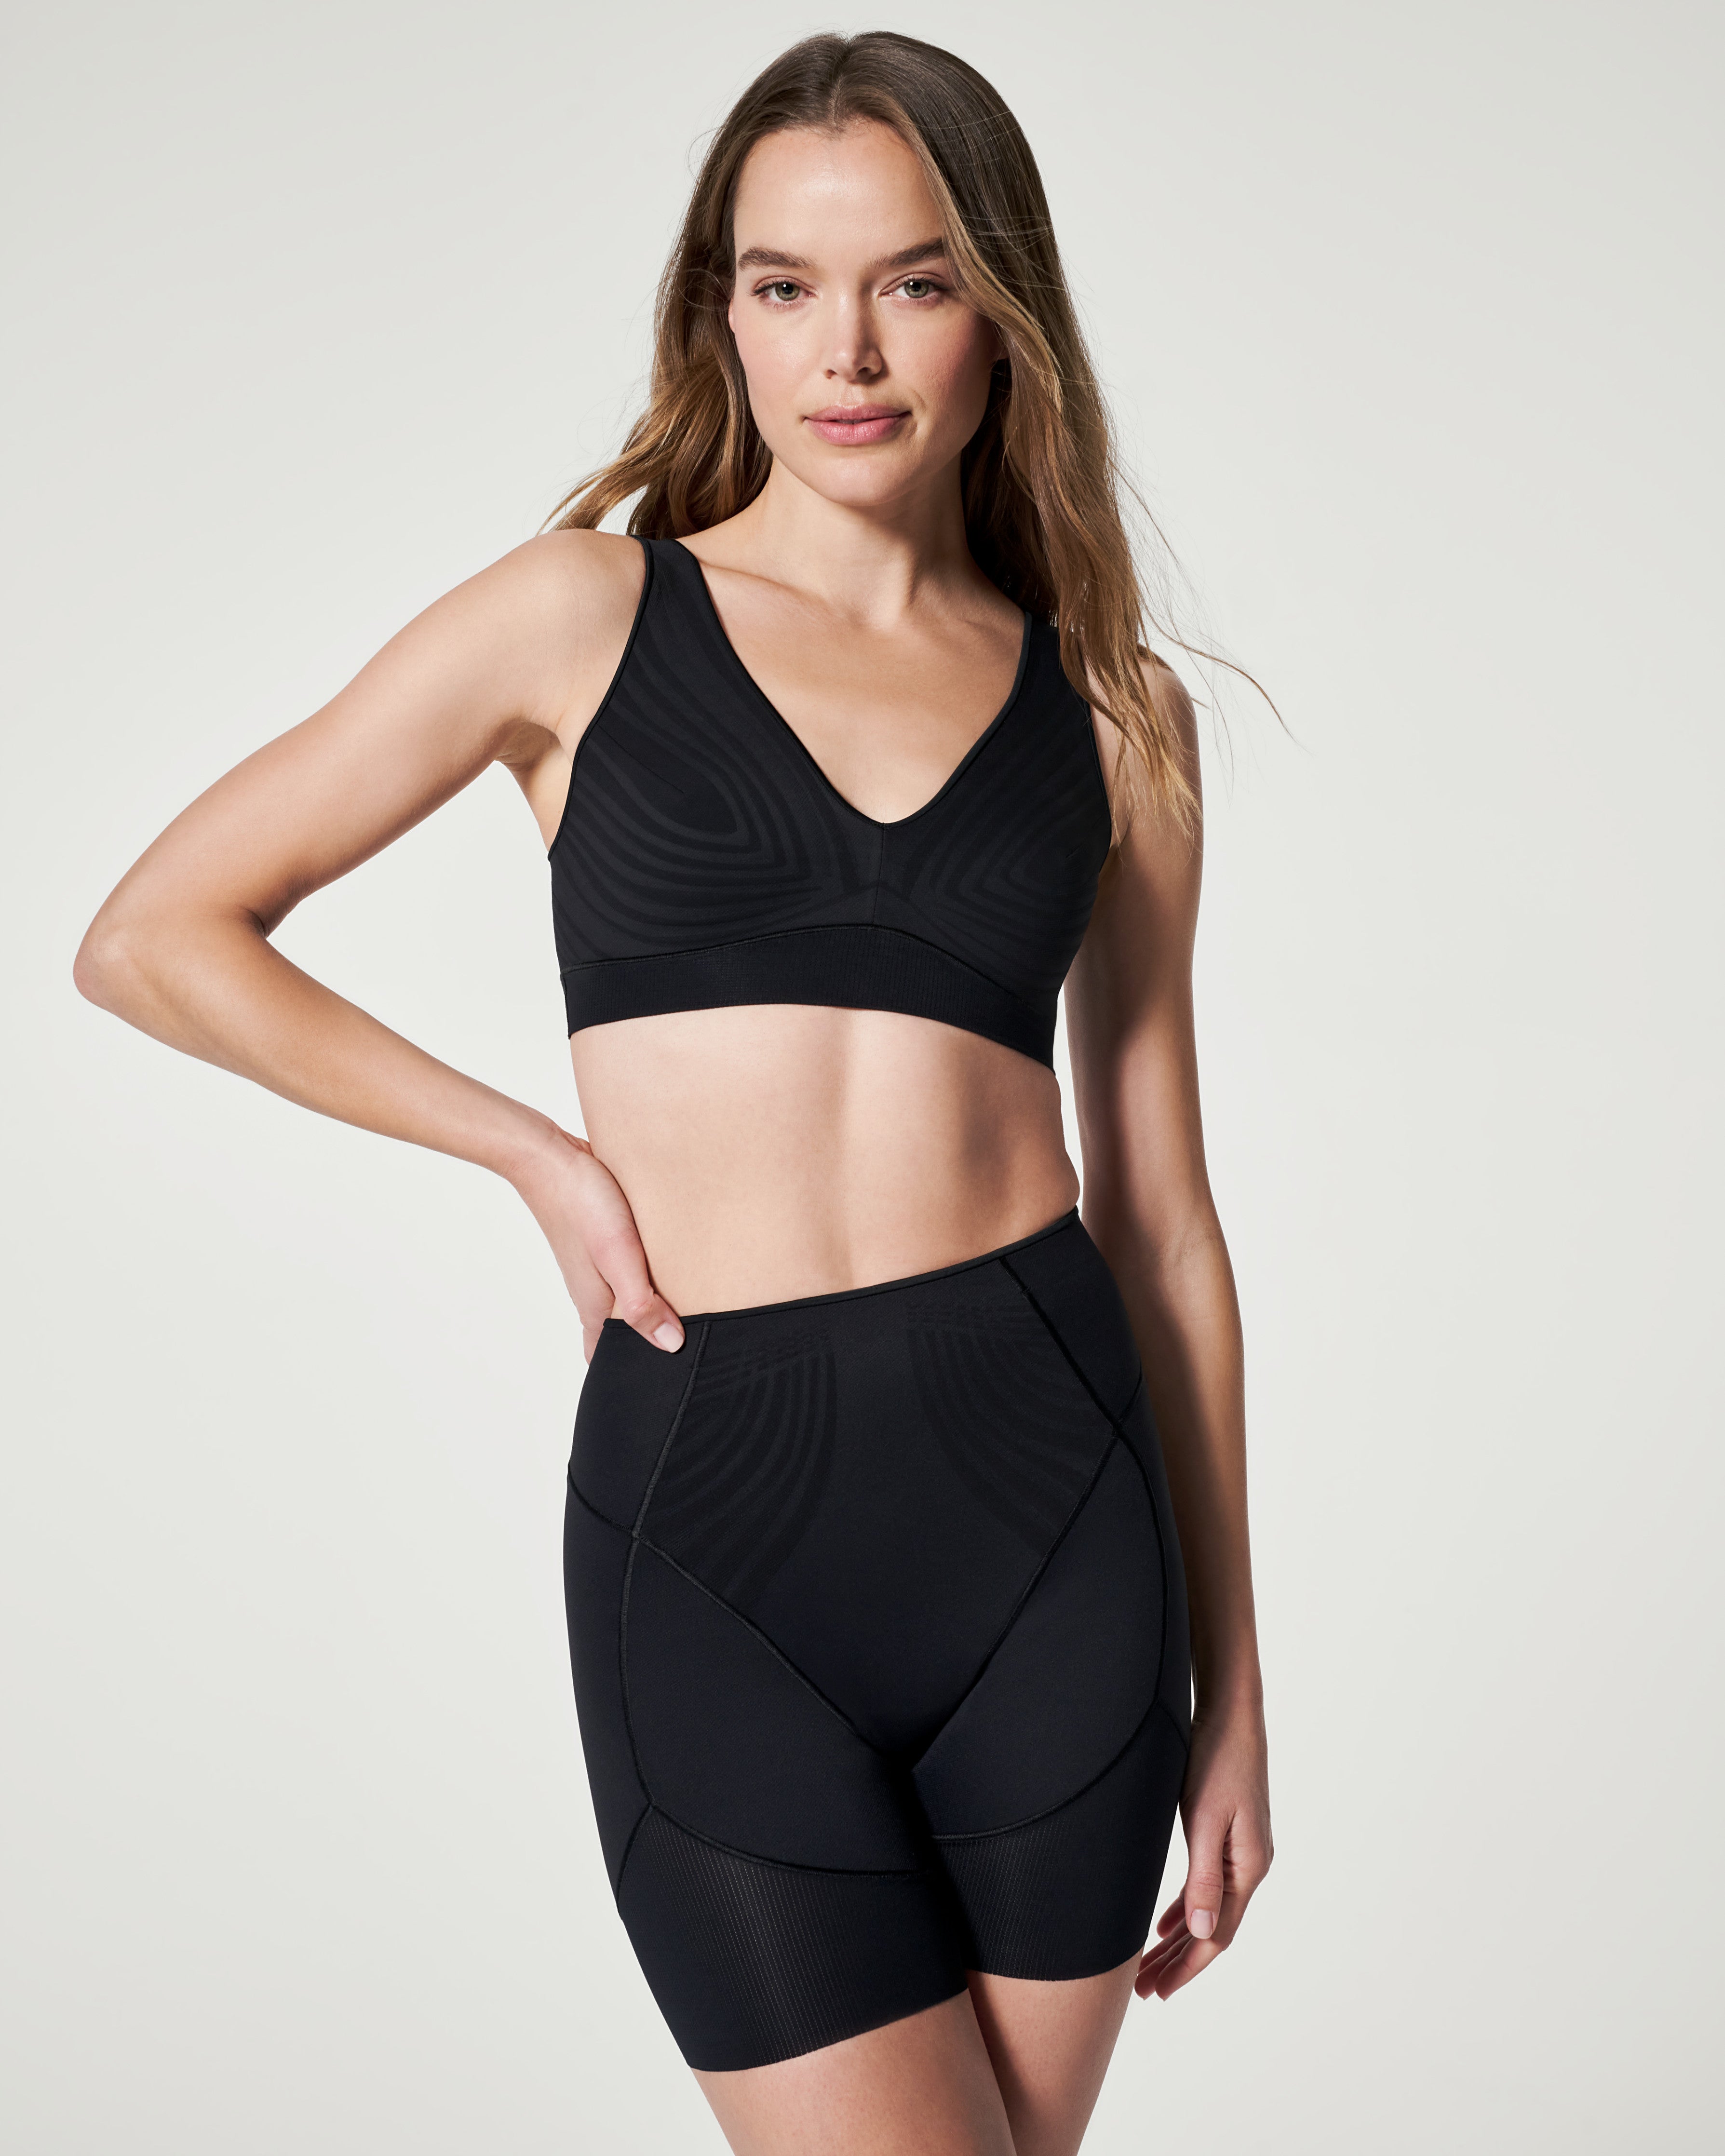 Spanx Haute Contour Mid-thigh Shorts in Black